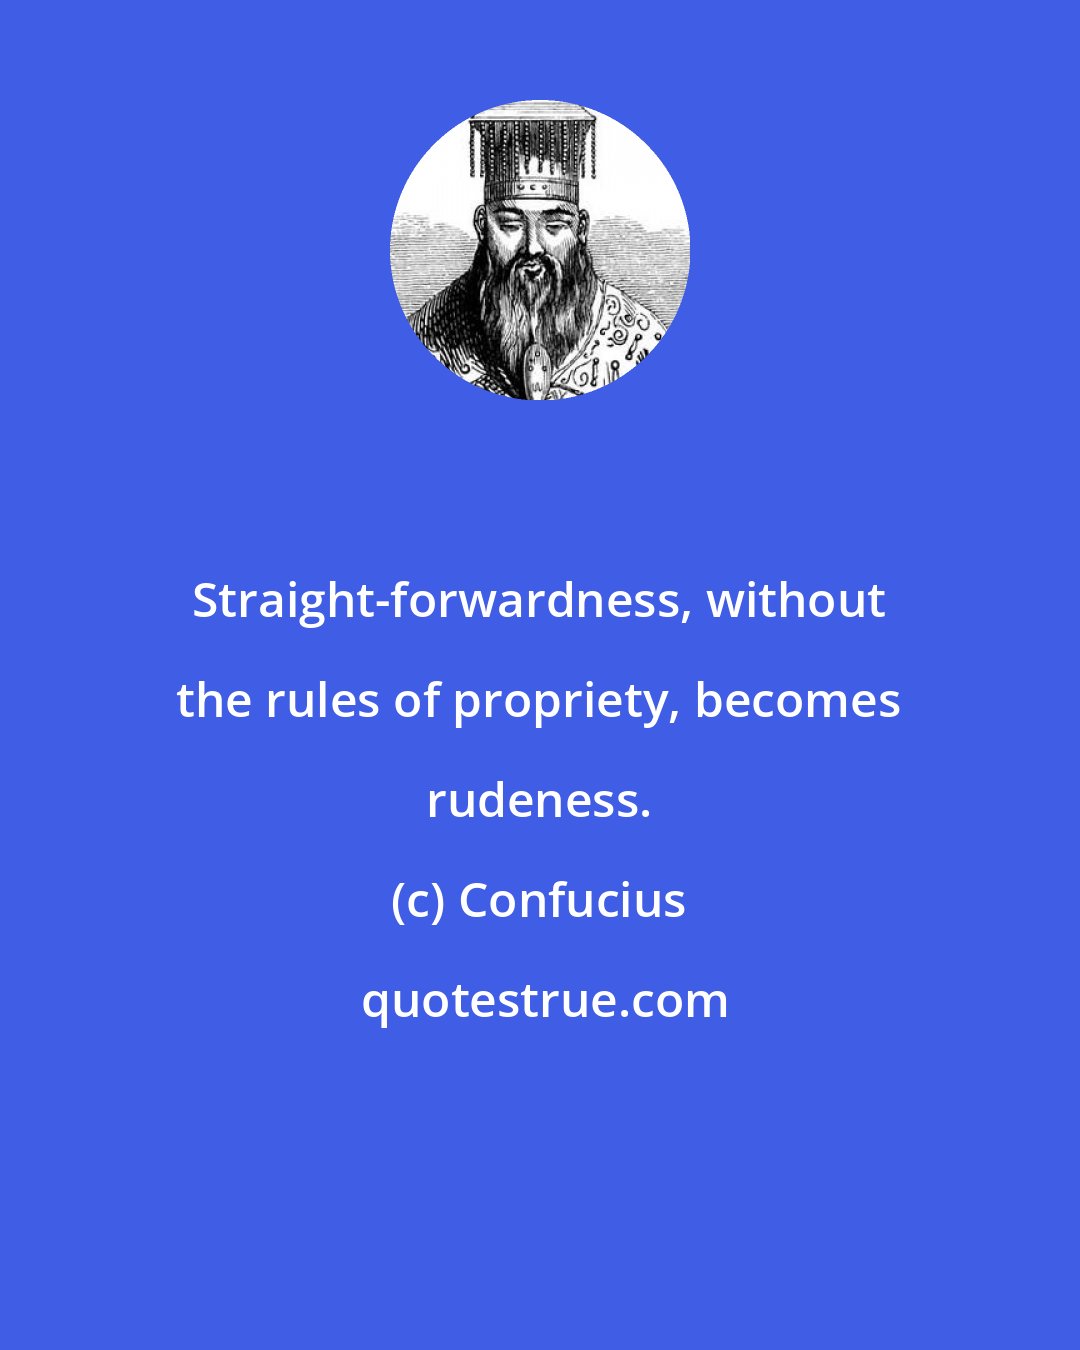 Confucius: Straight-forwardness, without the rules of propriety, becomes rudeness.